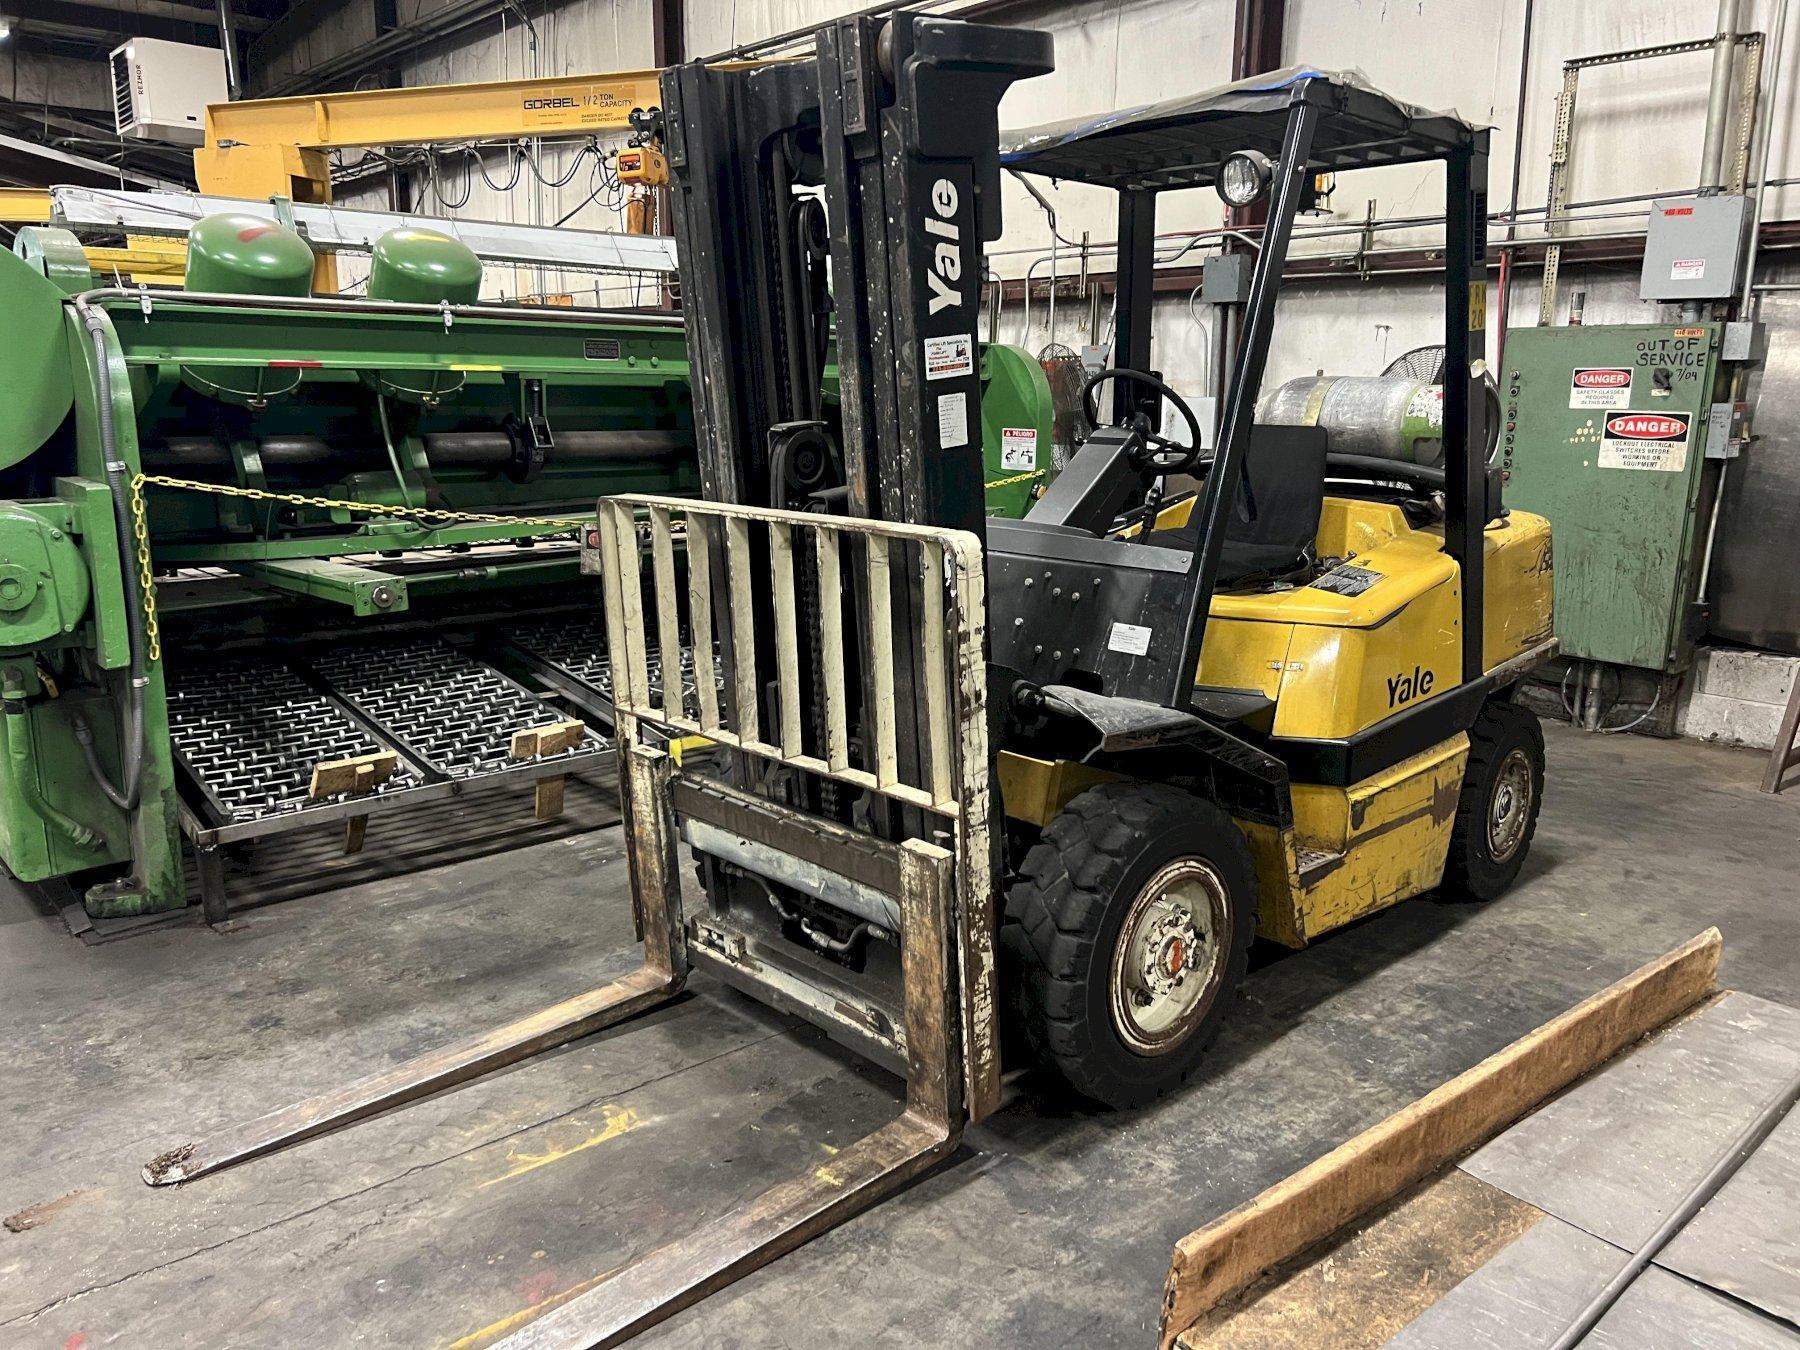 7750 LBS YALE MODEL #GLP080 LP-GAS FORKLIFT: STOCK #18838